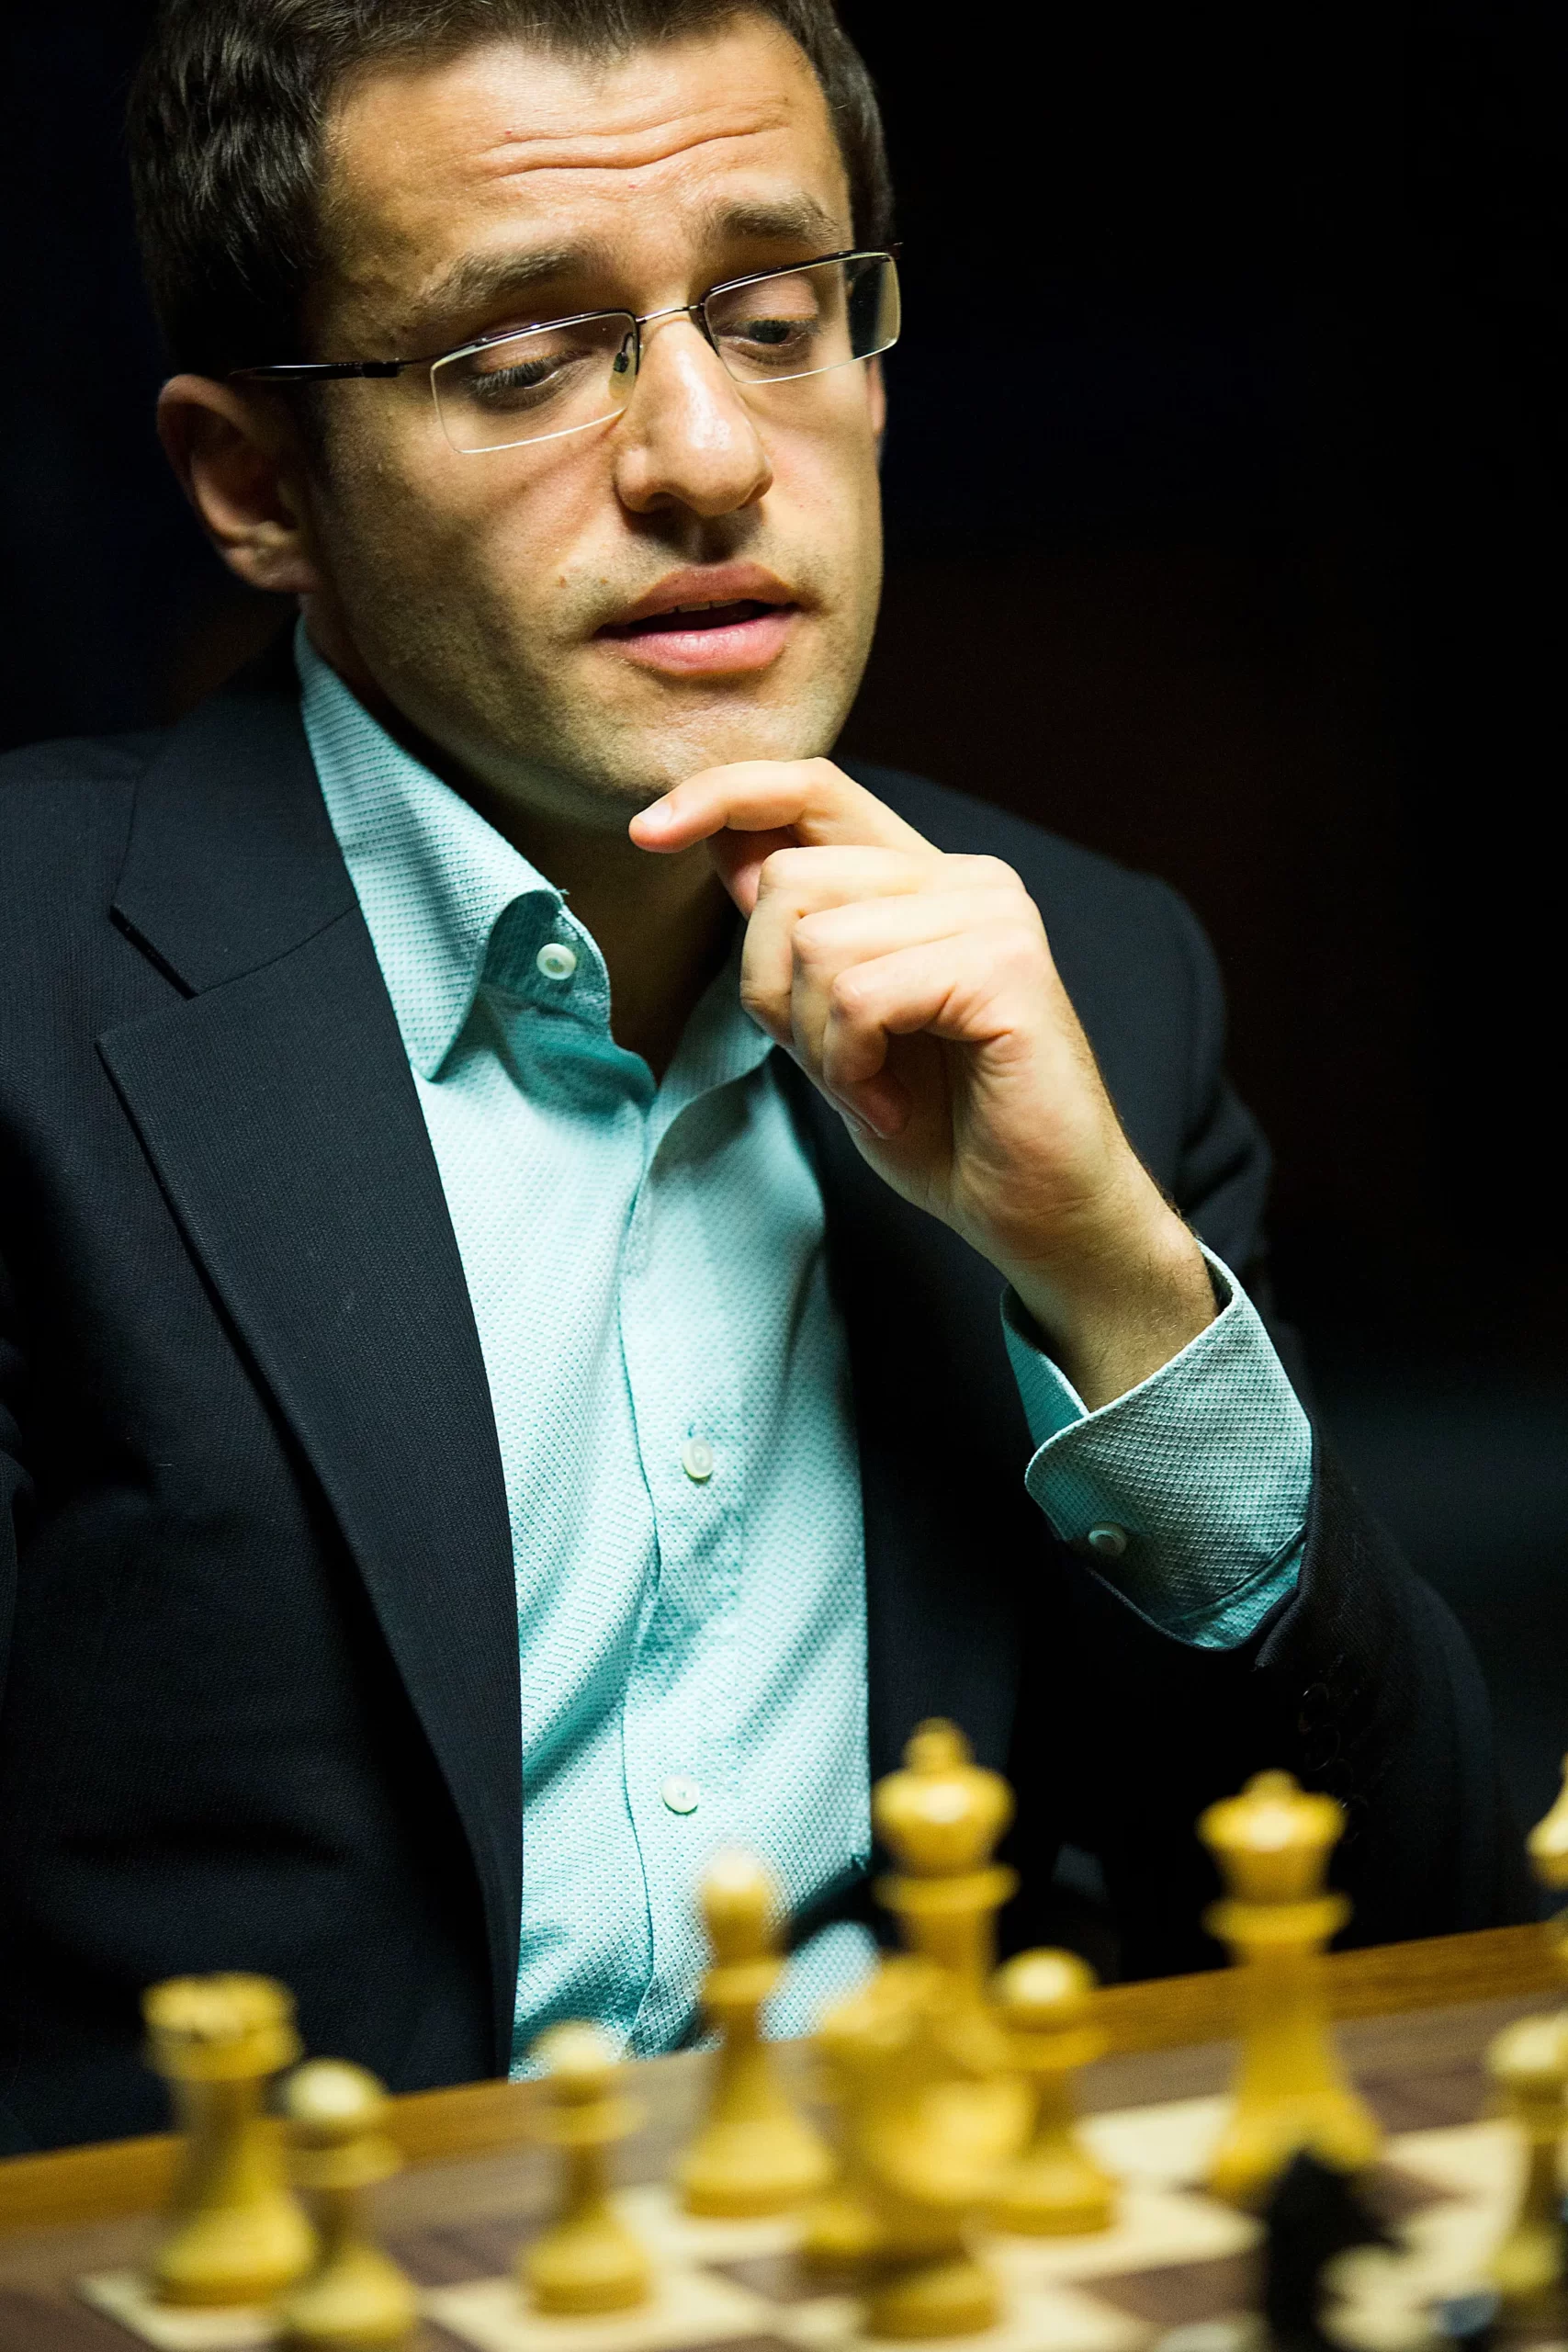 Levon Aronian (Quelle: The New Yorker)